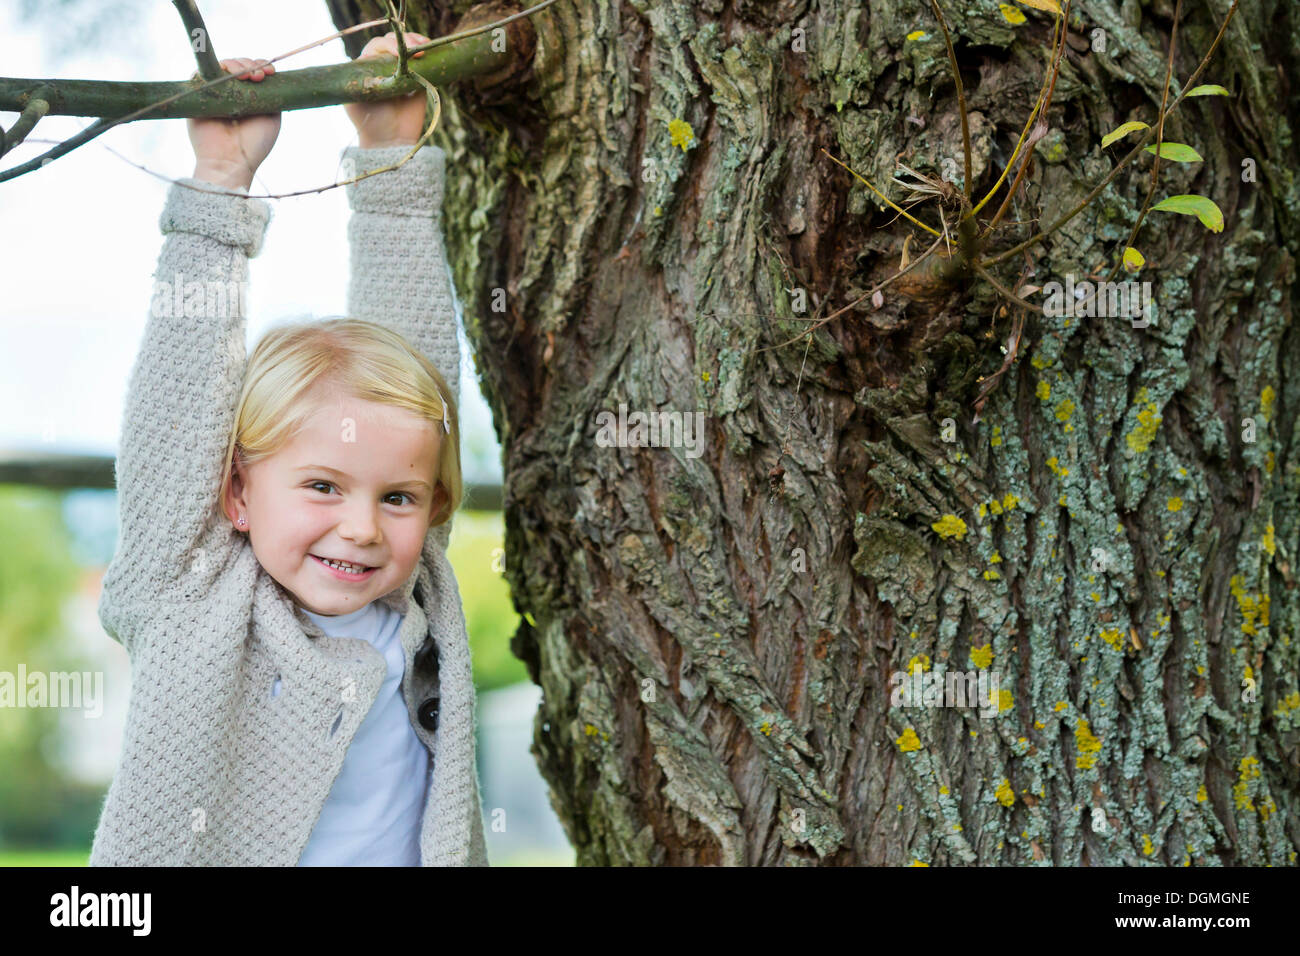 Girl, 4 years old, hanging on a branch Stock Photo